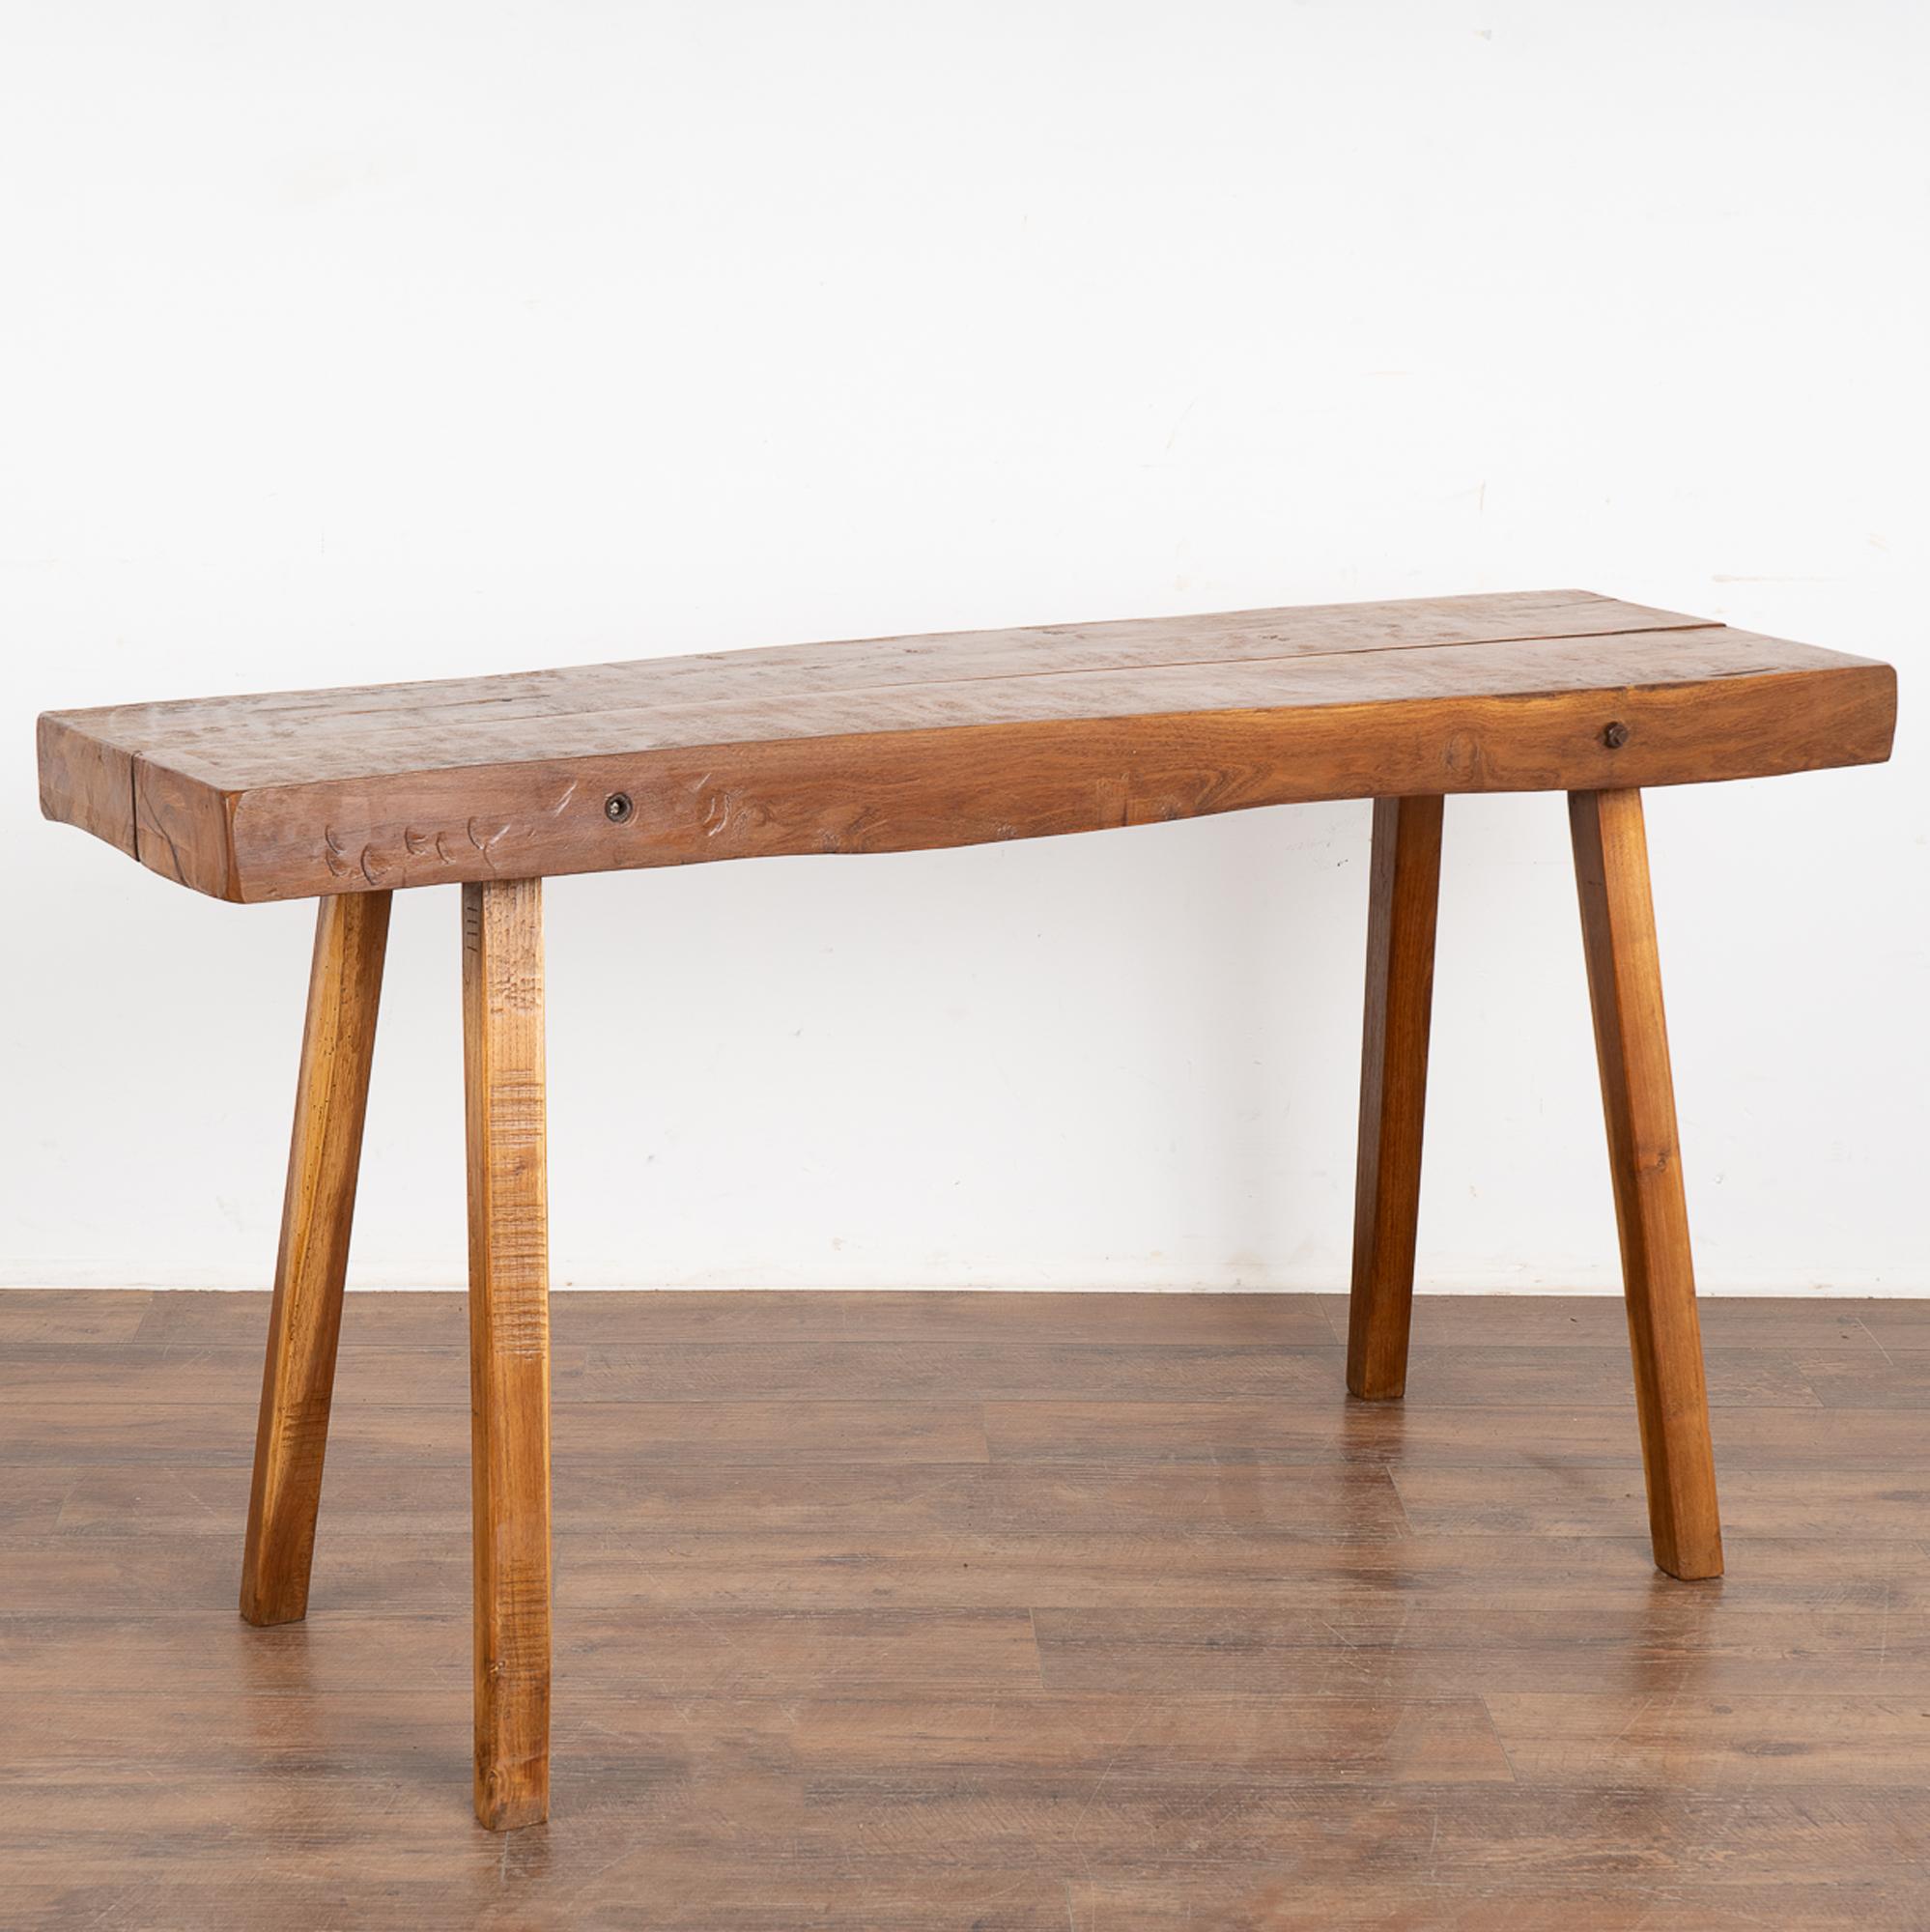 This rustic plank top console table with splay peg legs originally served as a work table.
The over 3